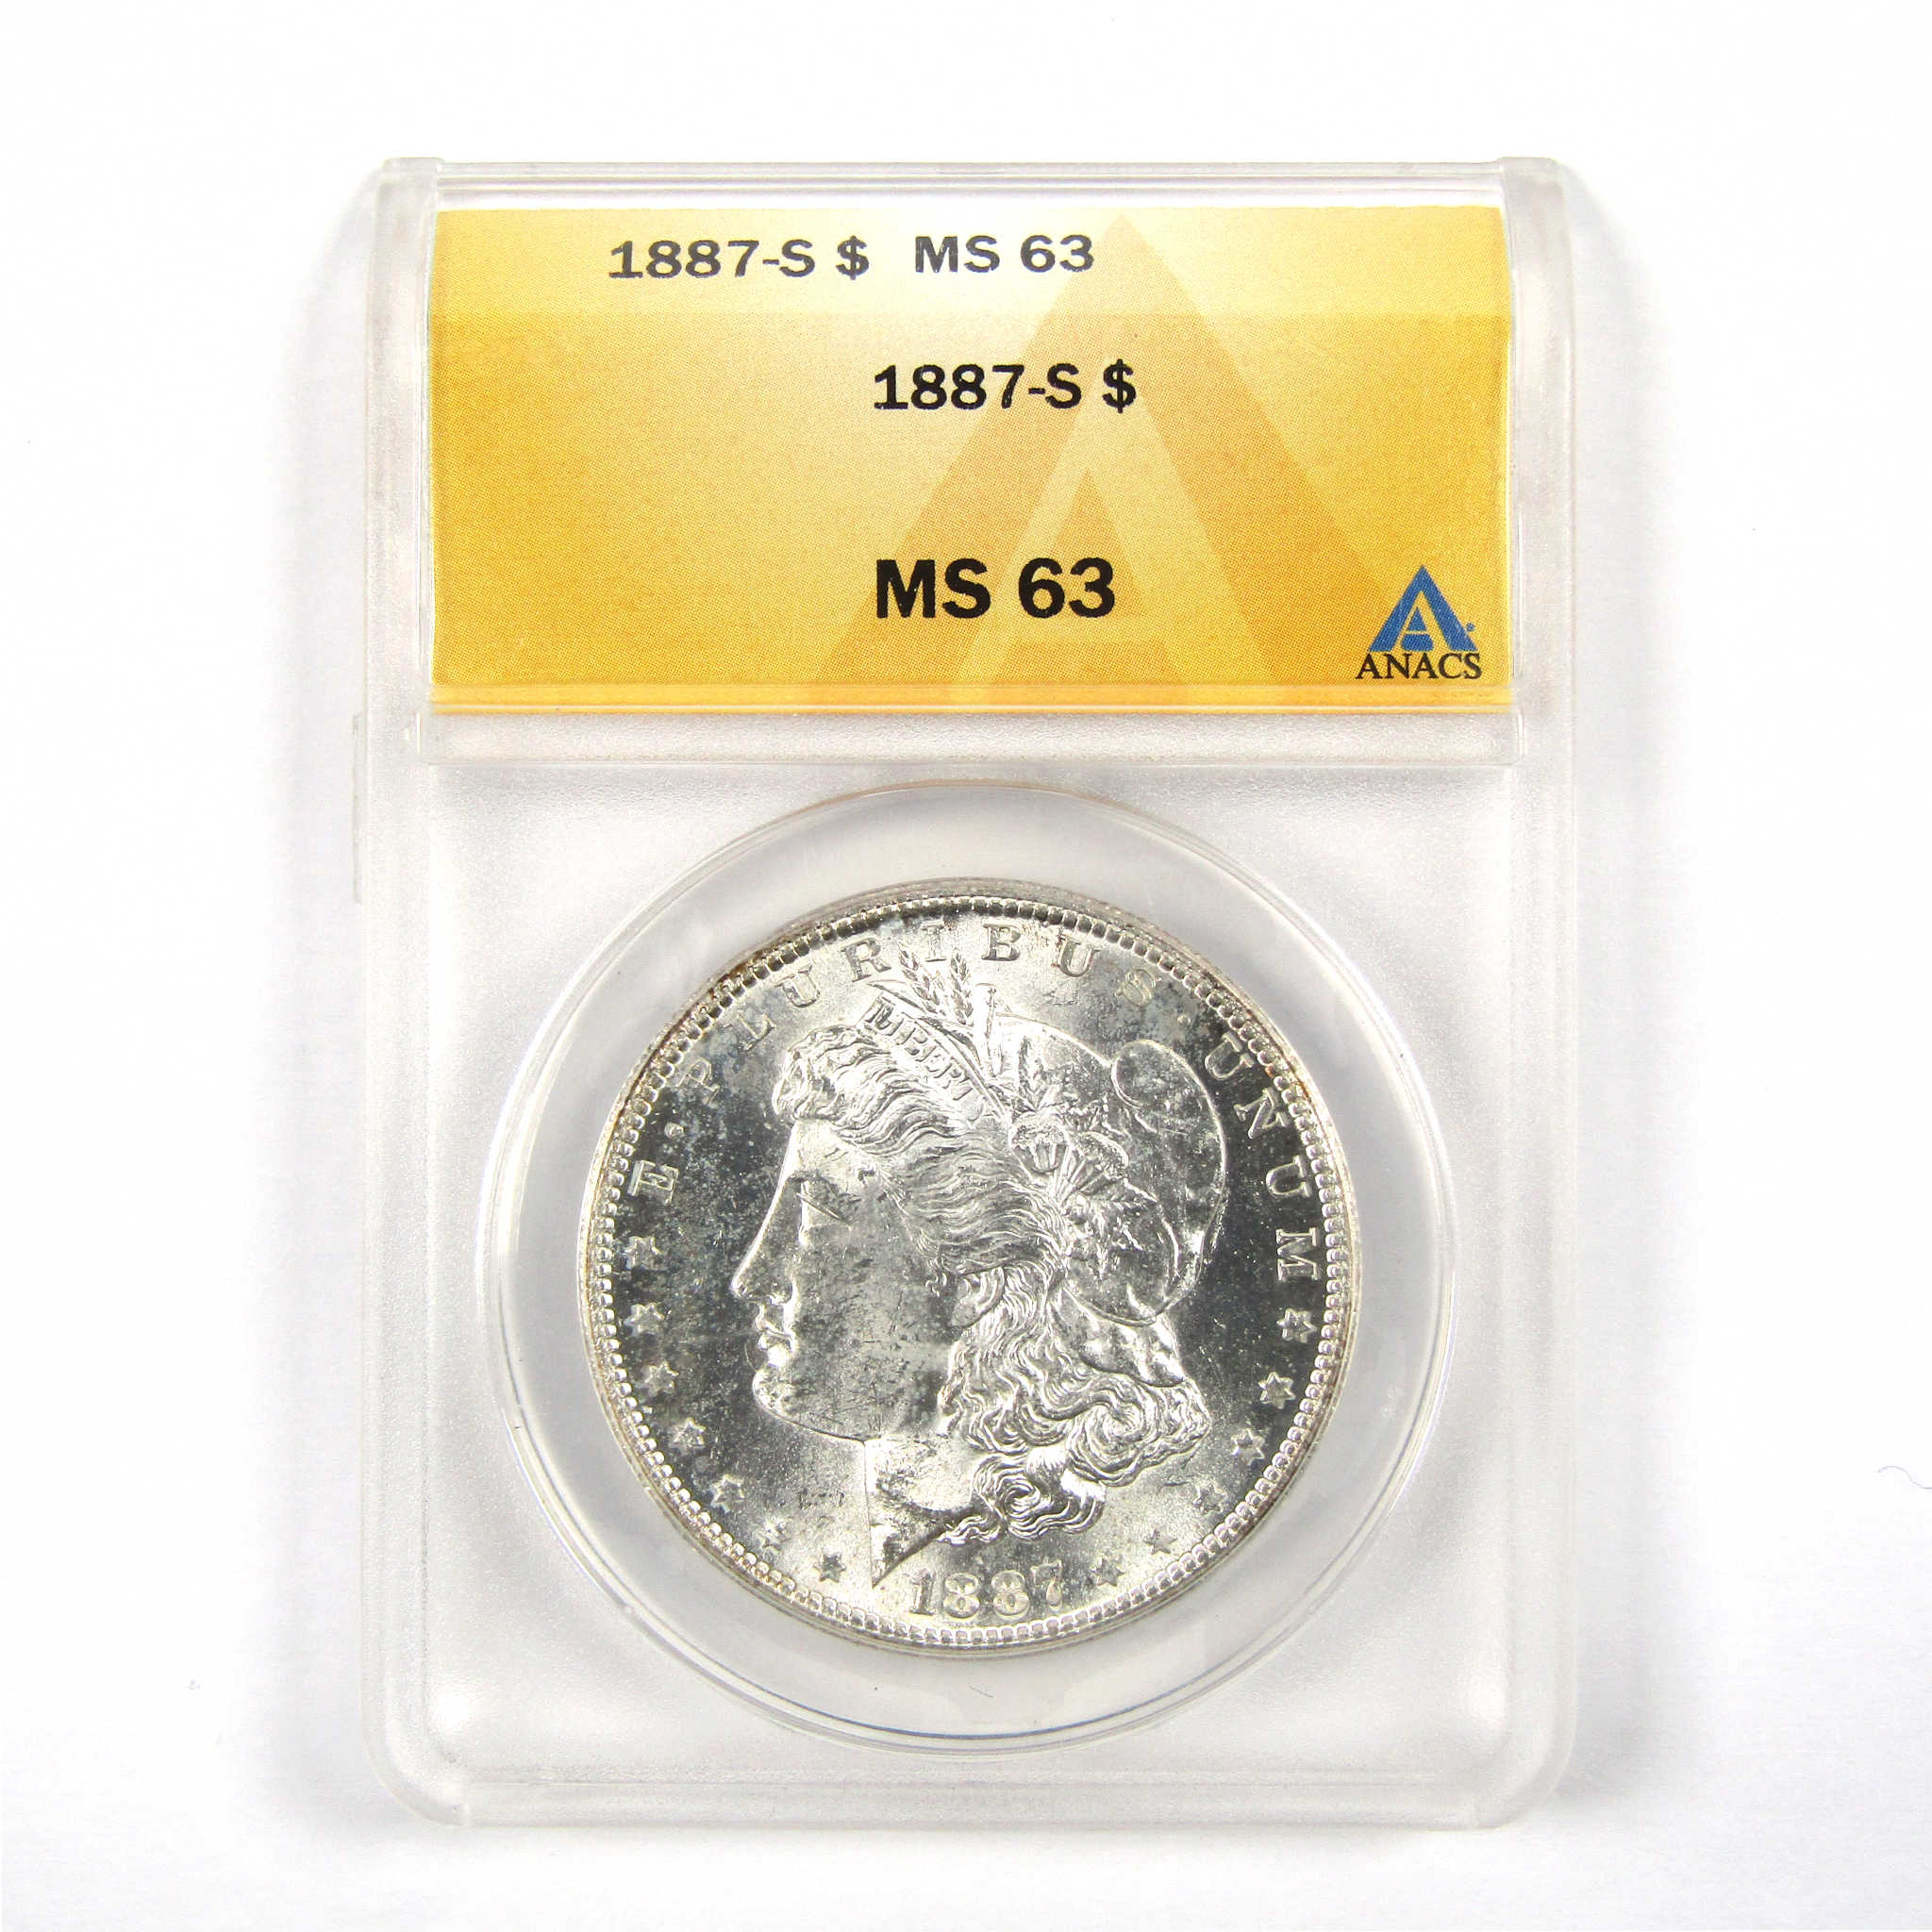 1887 S Morgan Dollar MS 63 ANACS 90% Silver $1 Uncirculated SKU:I9181 - Morgan coin - Morgan silver dollar - Morgan silver dollar for sale - Profile Coins &amp; Collectibles